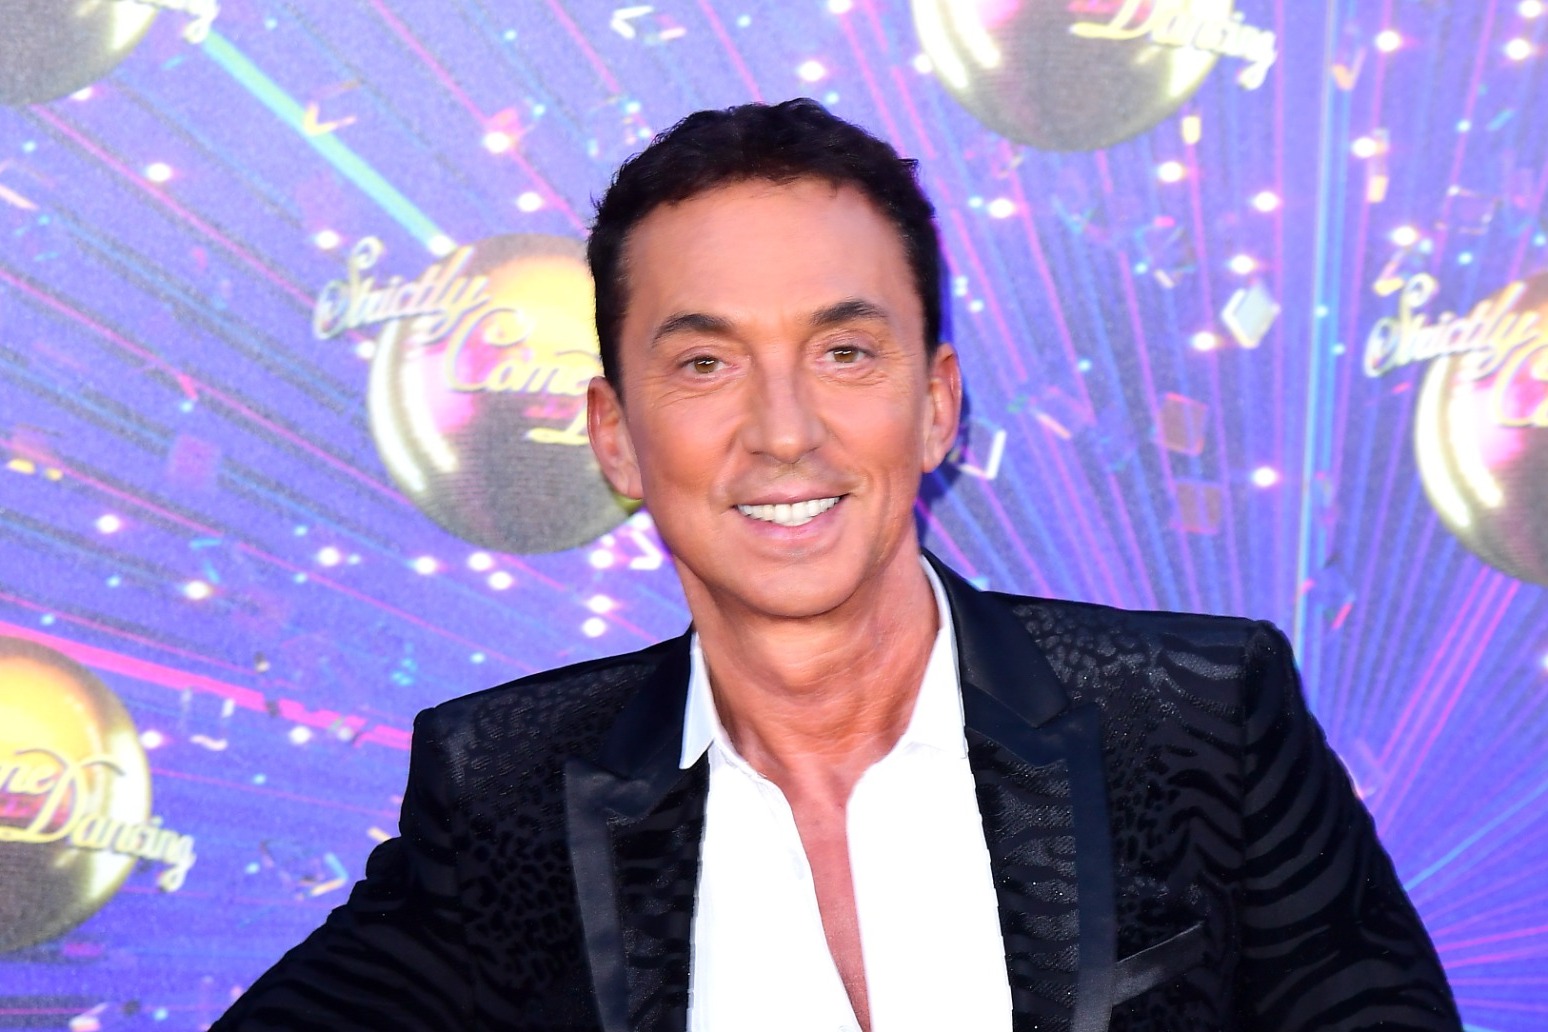 Bruno Tonioli discusses why he left Strictly saying the schedule was insane